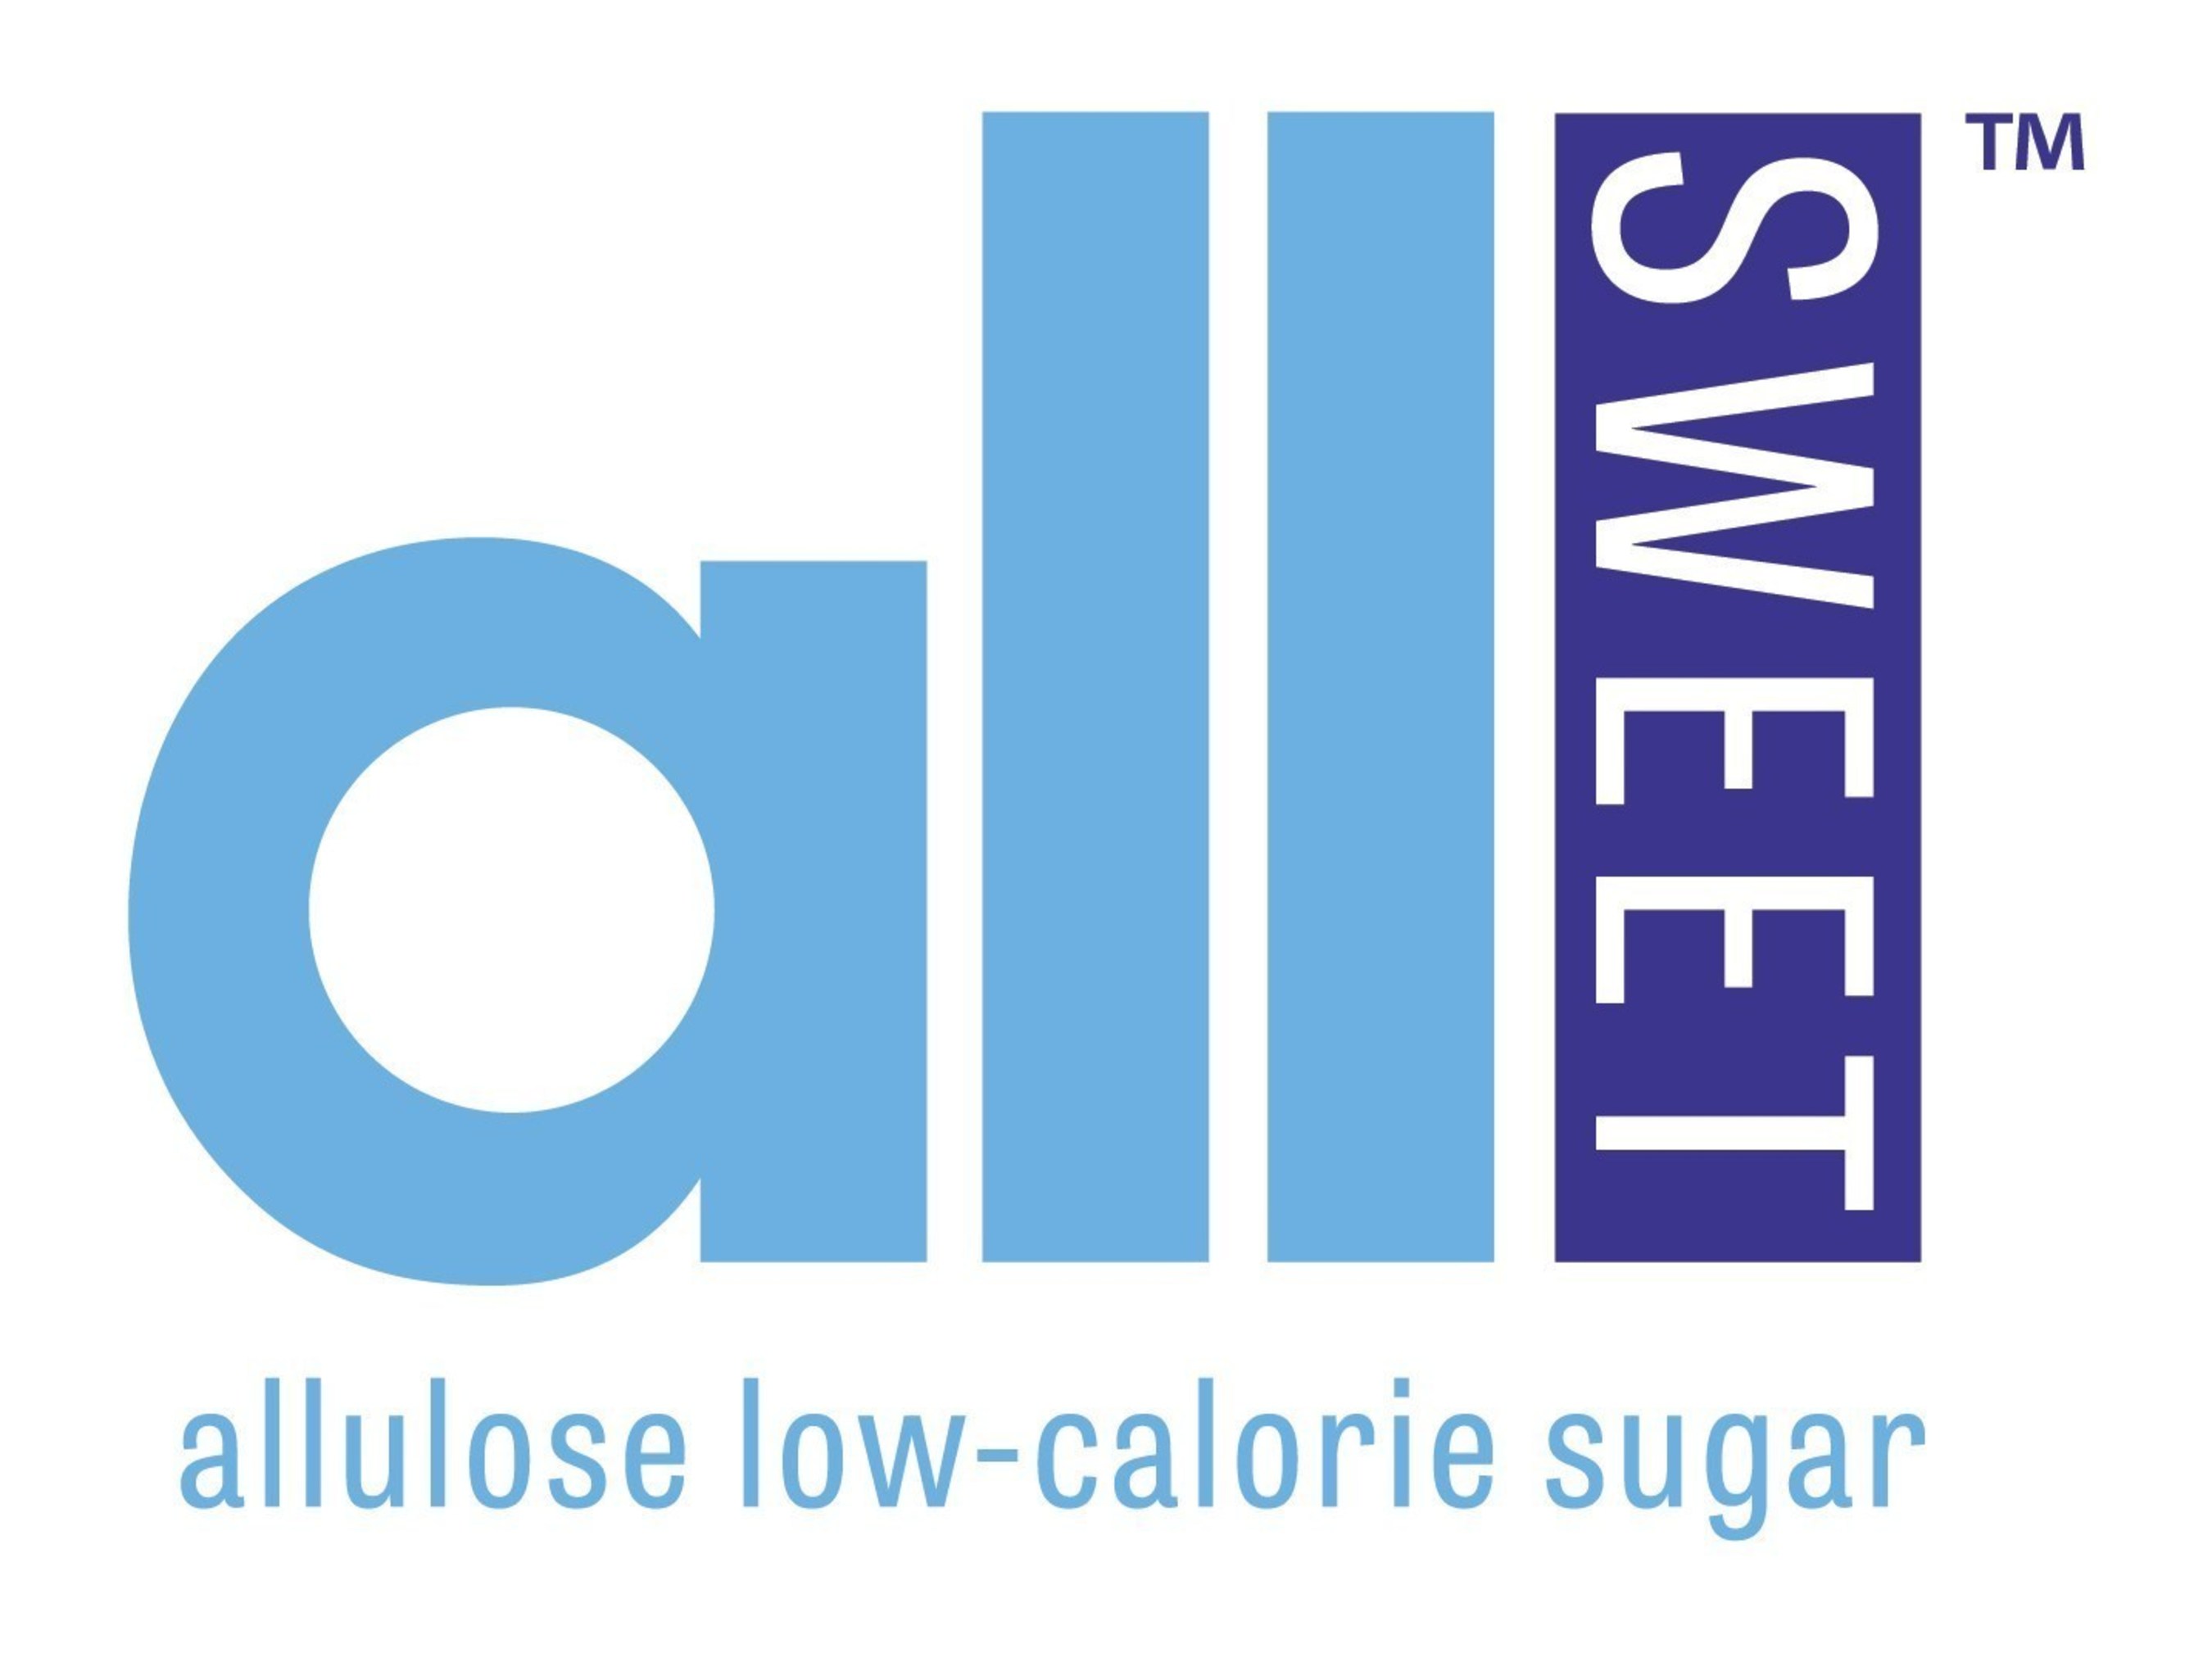 AllSweet(TM) Allulose Low-Calorie Sugar is 70% as sweet as sugar, with fewer than 10% of the calories